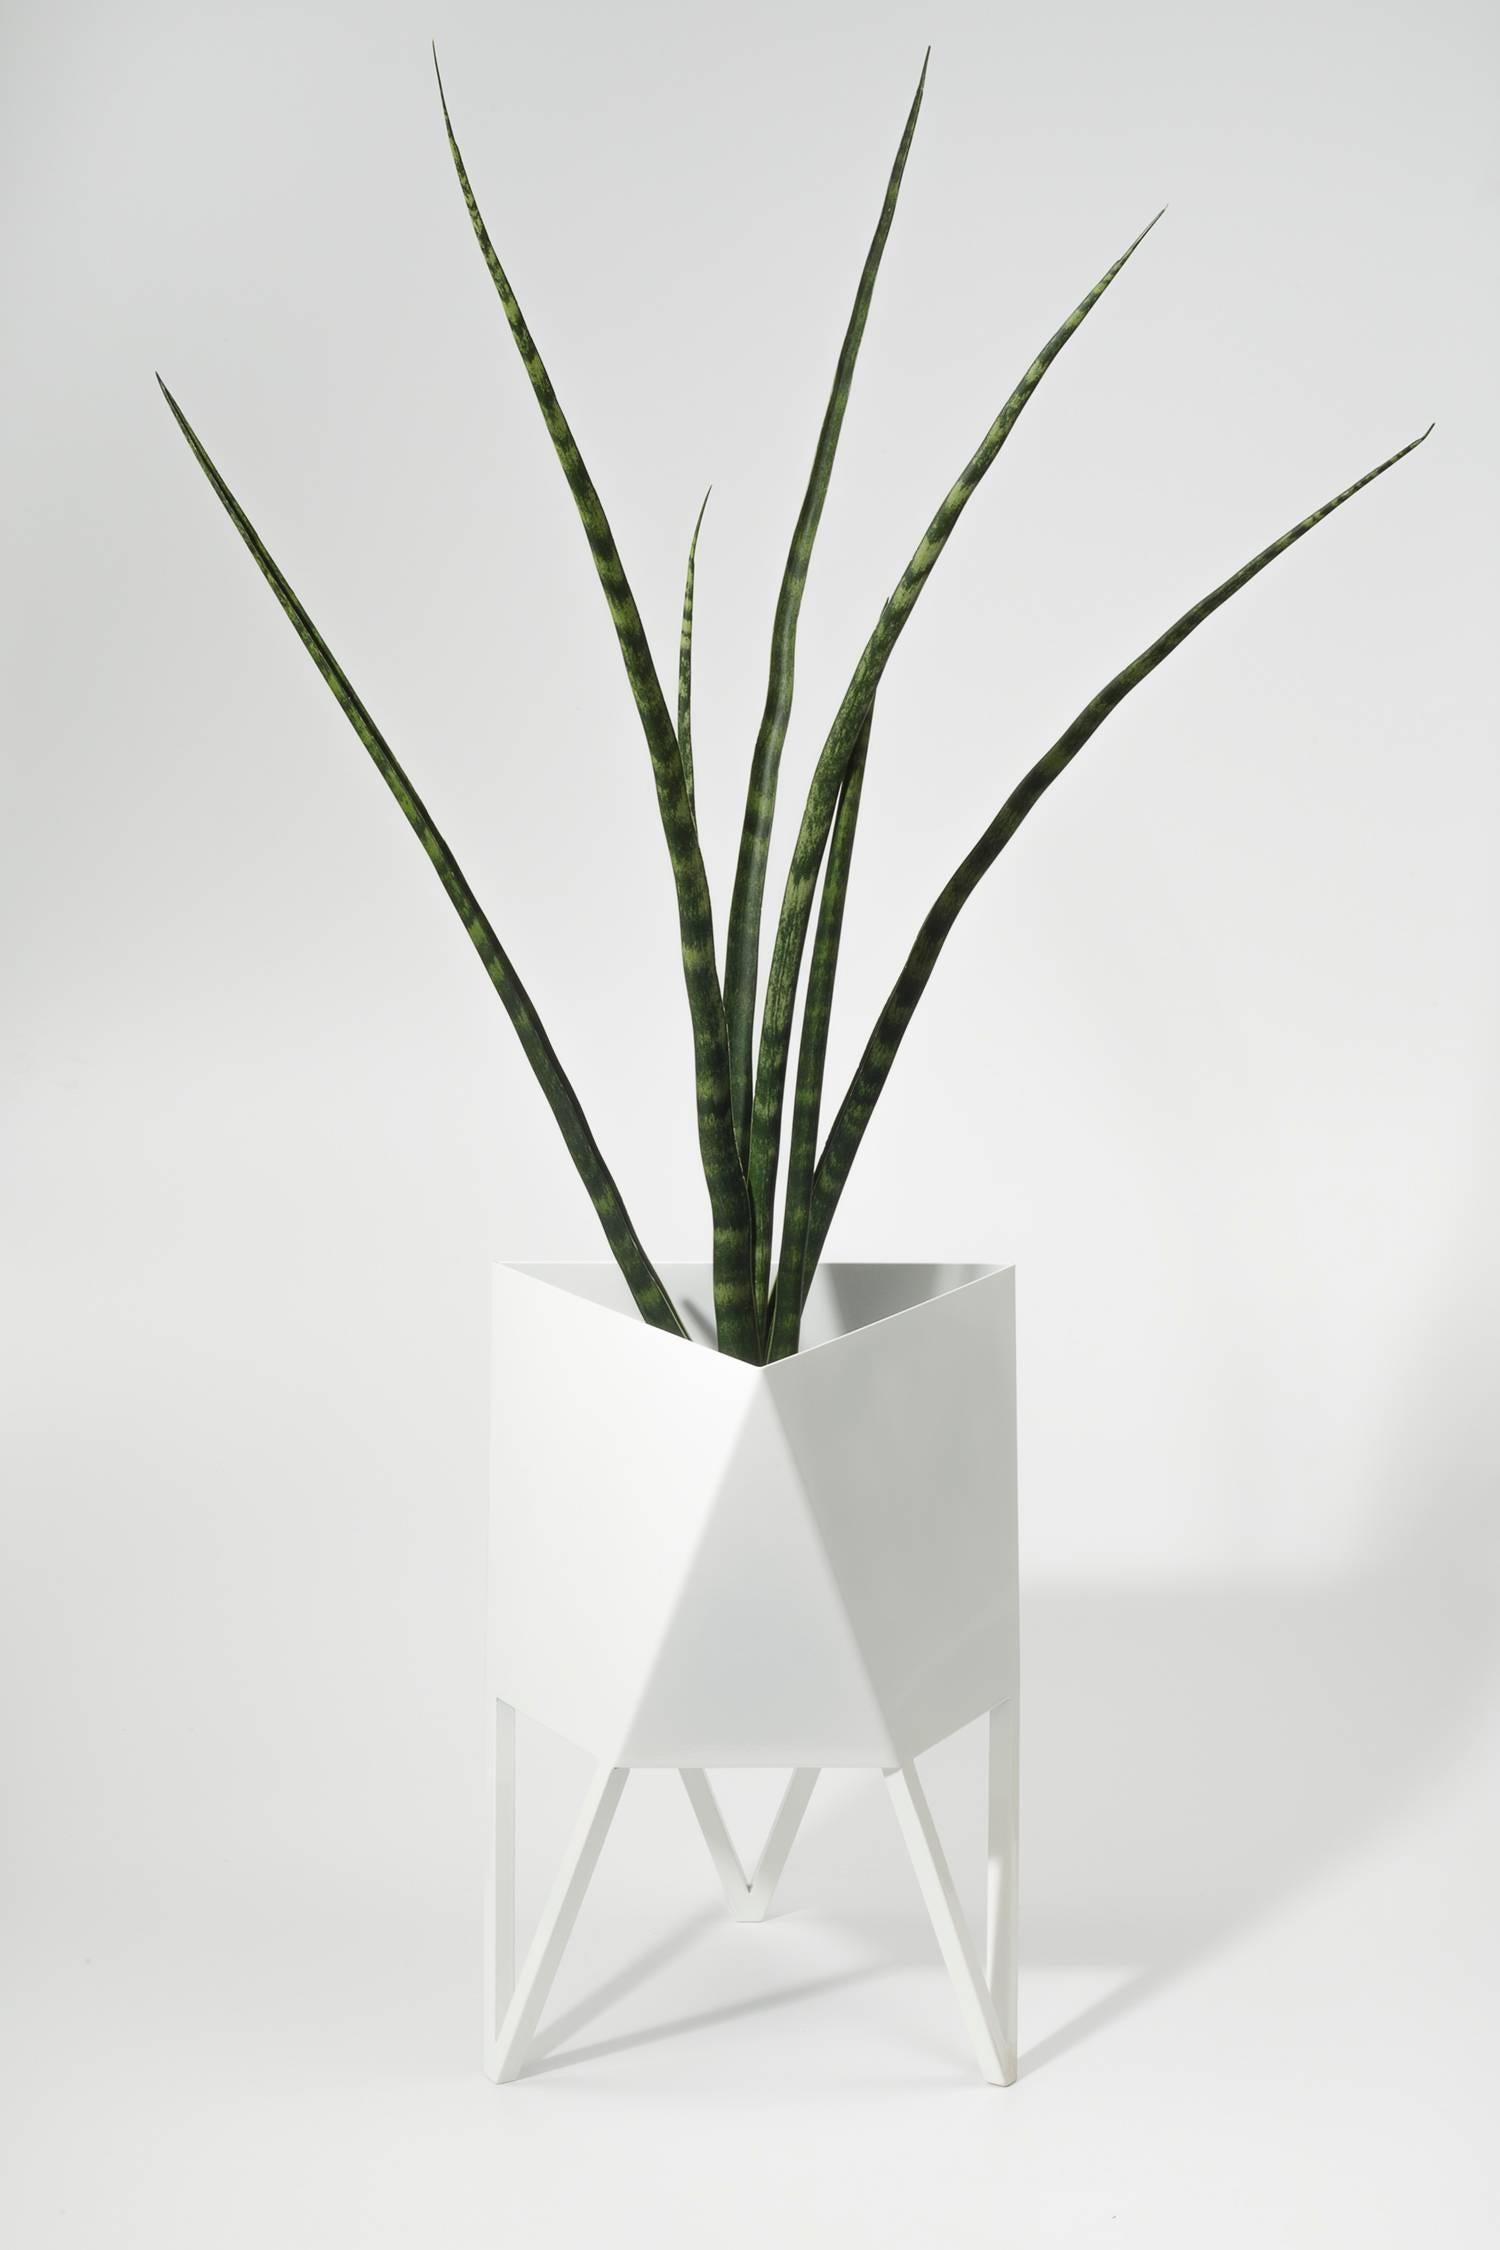 Deca Planter in Mineral, Large, by Force/Collide, 2023 10